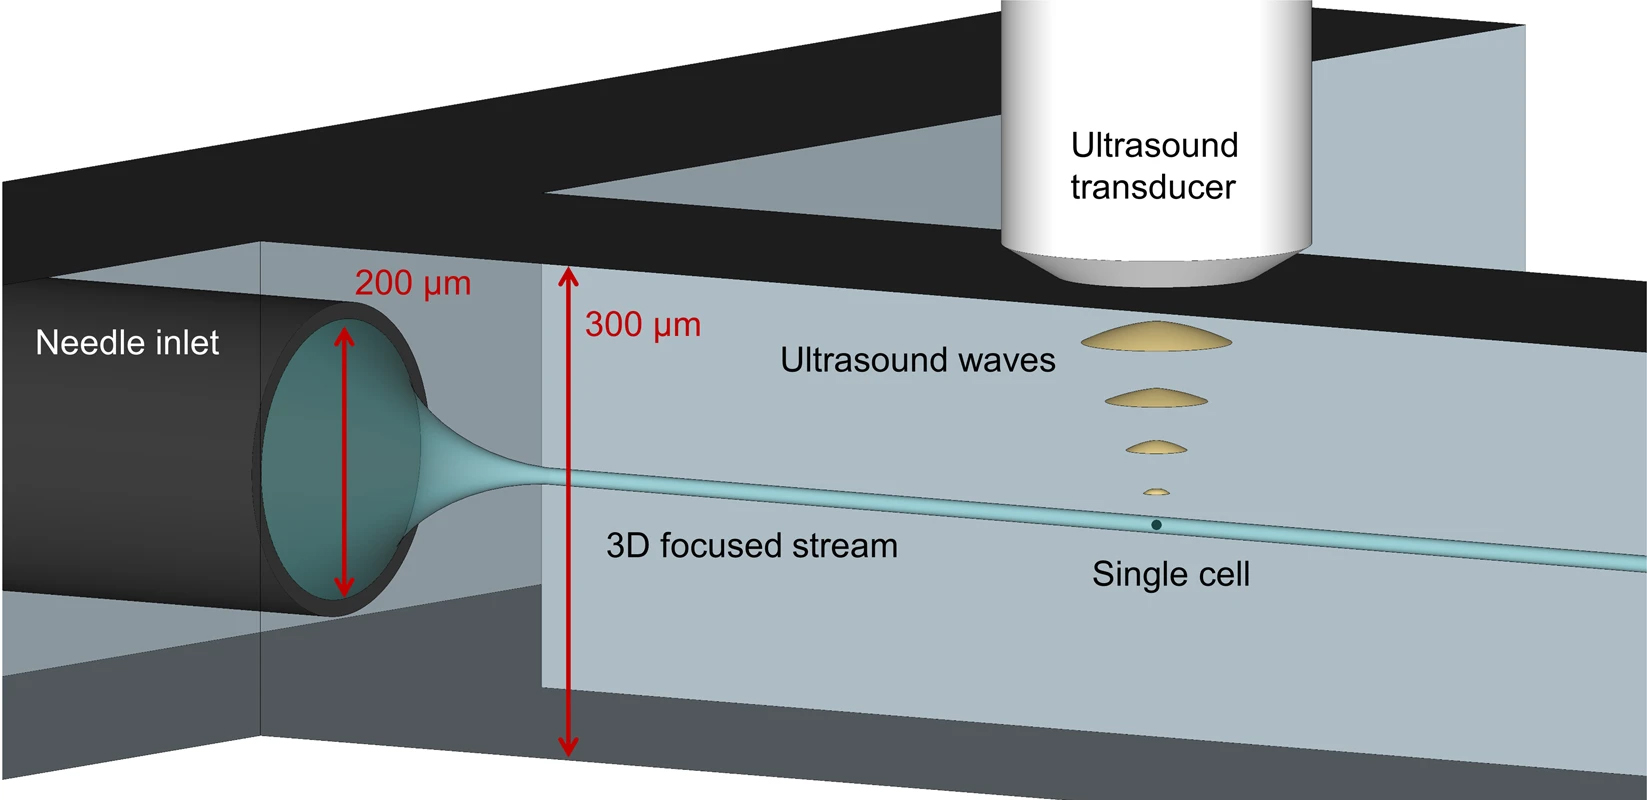 Schematic illustrating the combination of ultrasound and microfluidics to interrogate single cells.